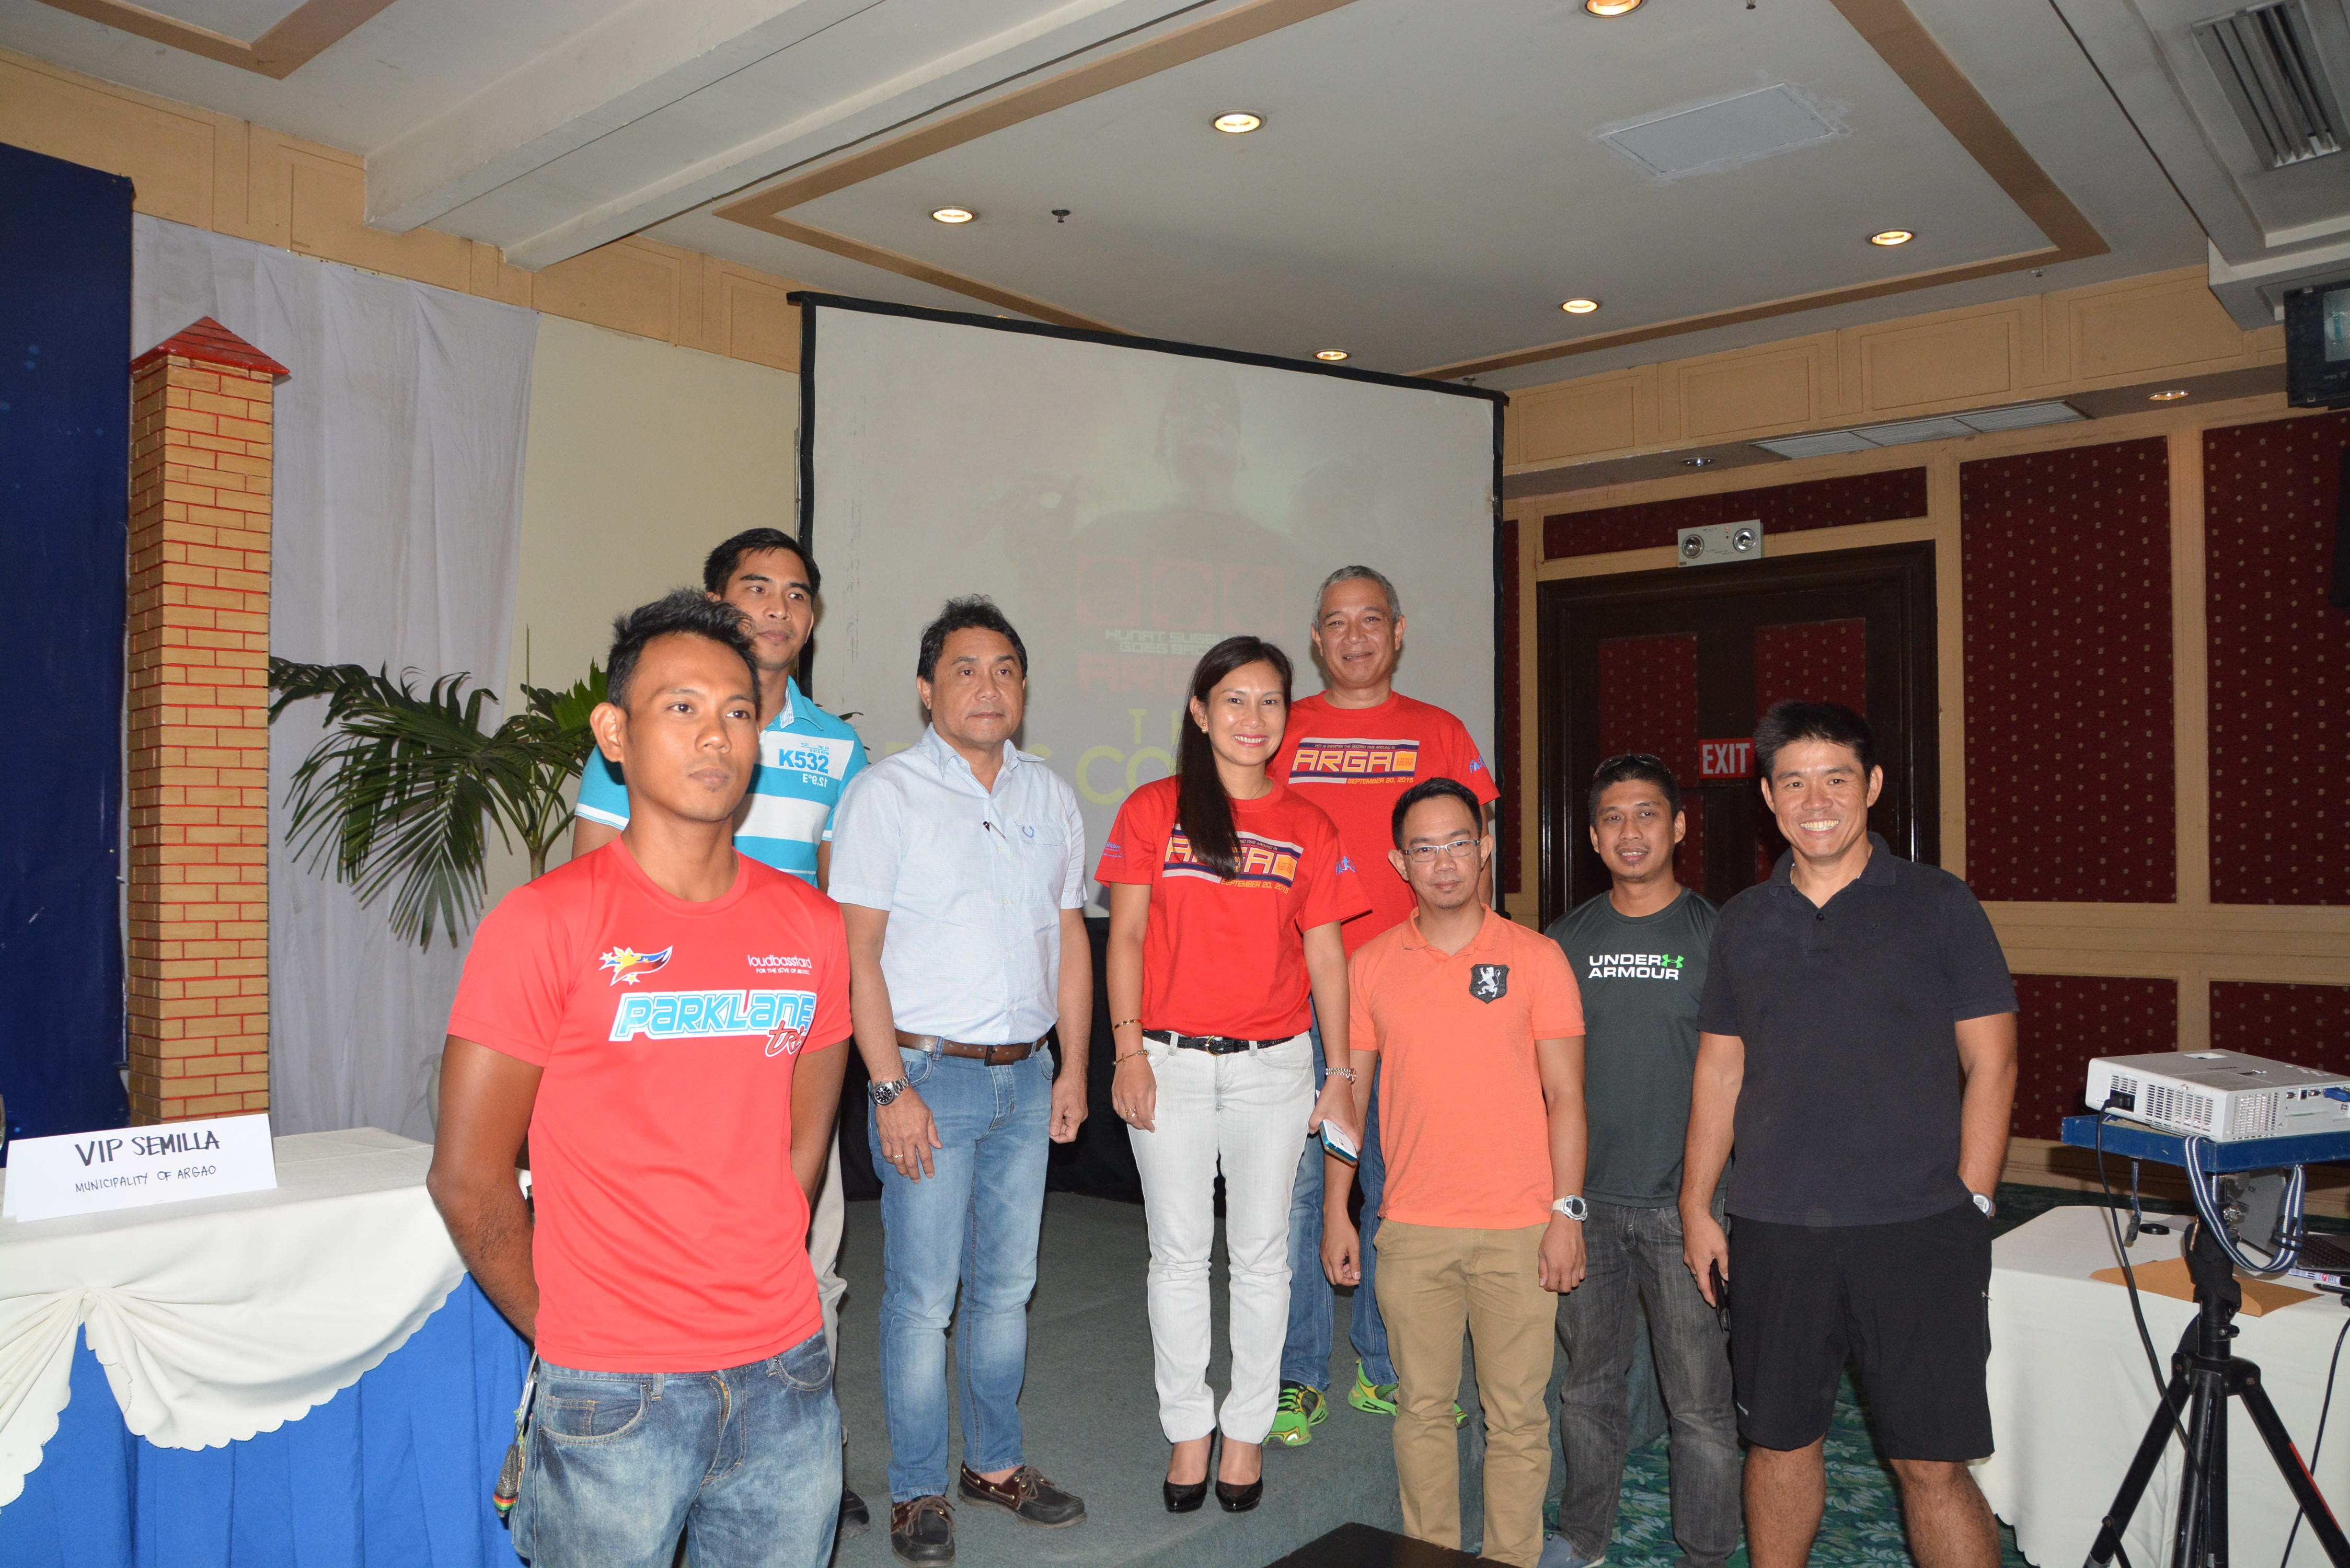 Organizers and some members of the teams participating in the upcoming Hunat Sugbu Triathlon gather at the Cebu Parlane International Hotel after a press conference. In the photo are (back row, from left) Team Manager of Parklane Tri Team Robert Martinez, Argao Mayor Edsel Galeos, Parklane general manager Cen Manguilimutan, Johny Ferniz of Parklane Tri Team, John Inot of Repro Optima, Darwin Saromines of Tri Liloan and Alan Choachuy of Metafit. (CDN/CHRISTIAN MANINGO)